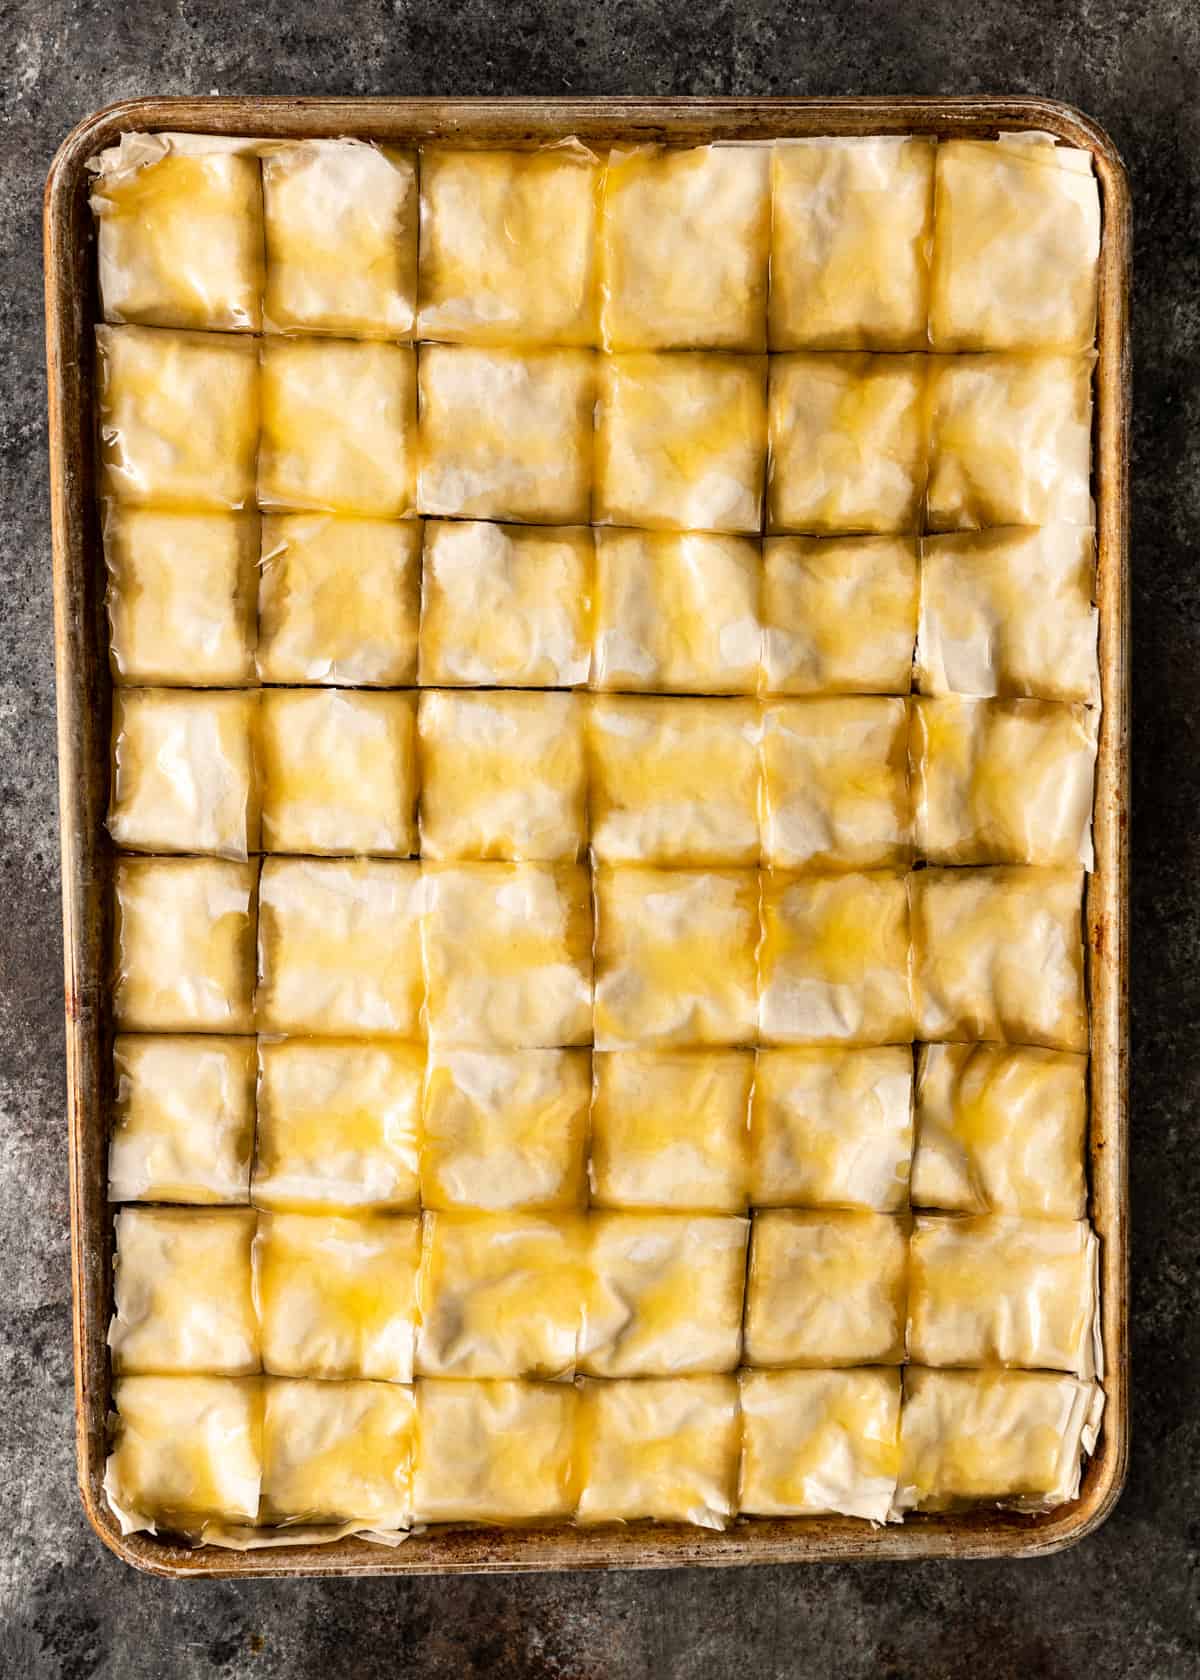 top down view of uncooked cut baklava on a baking sheet soaked in melted ghee or butter